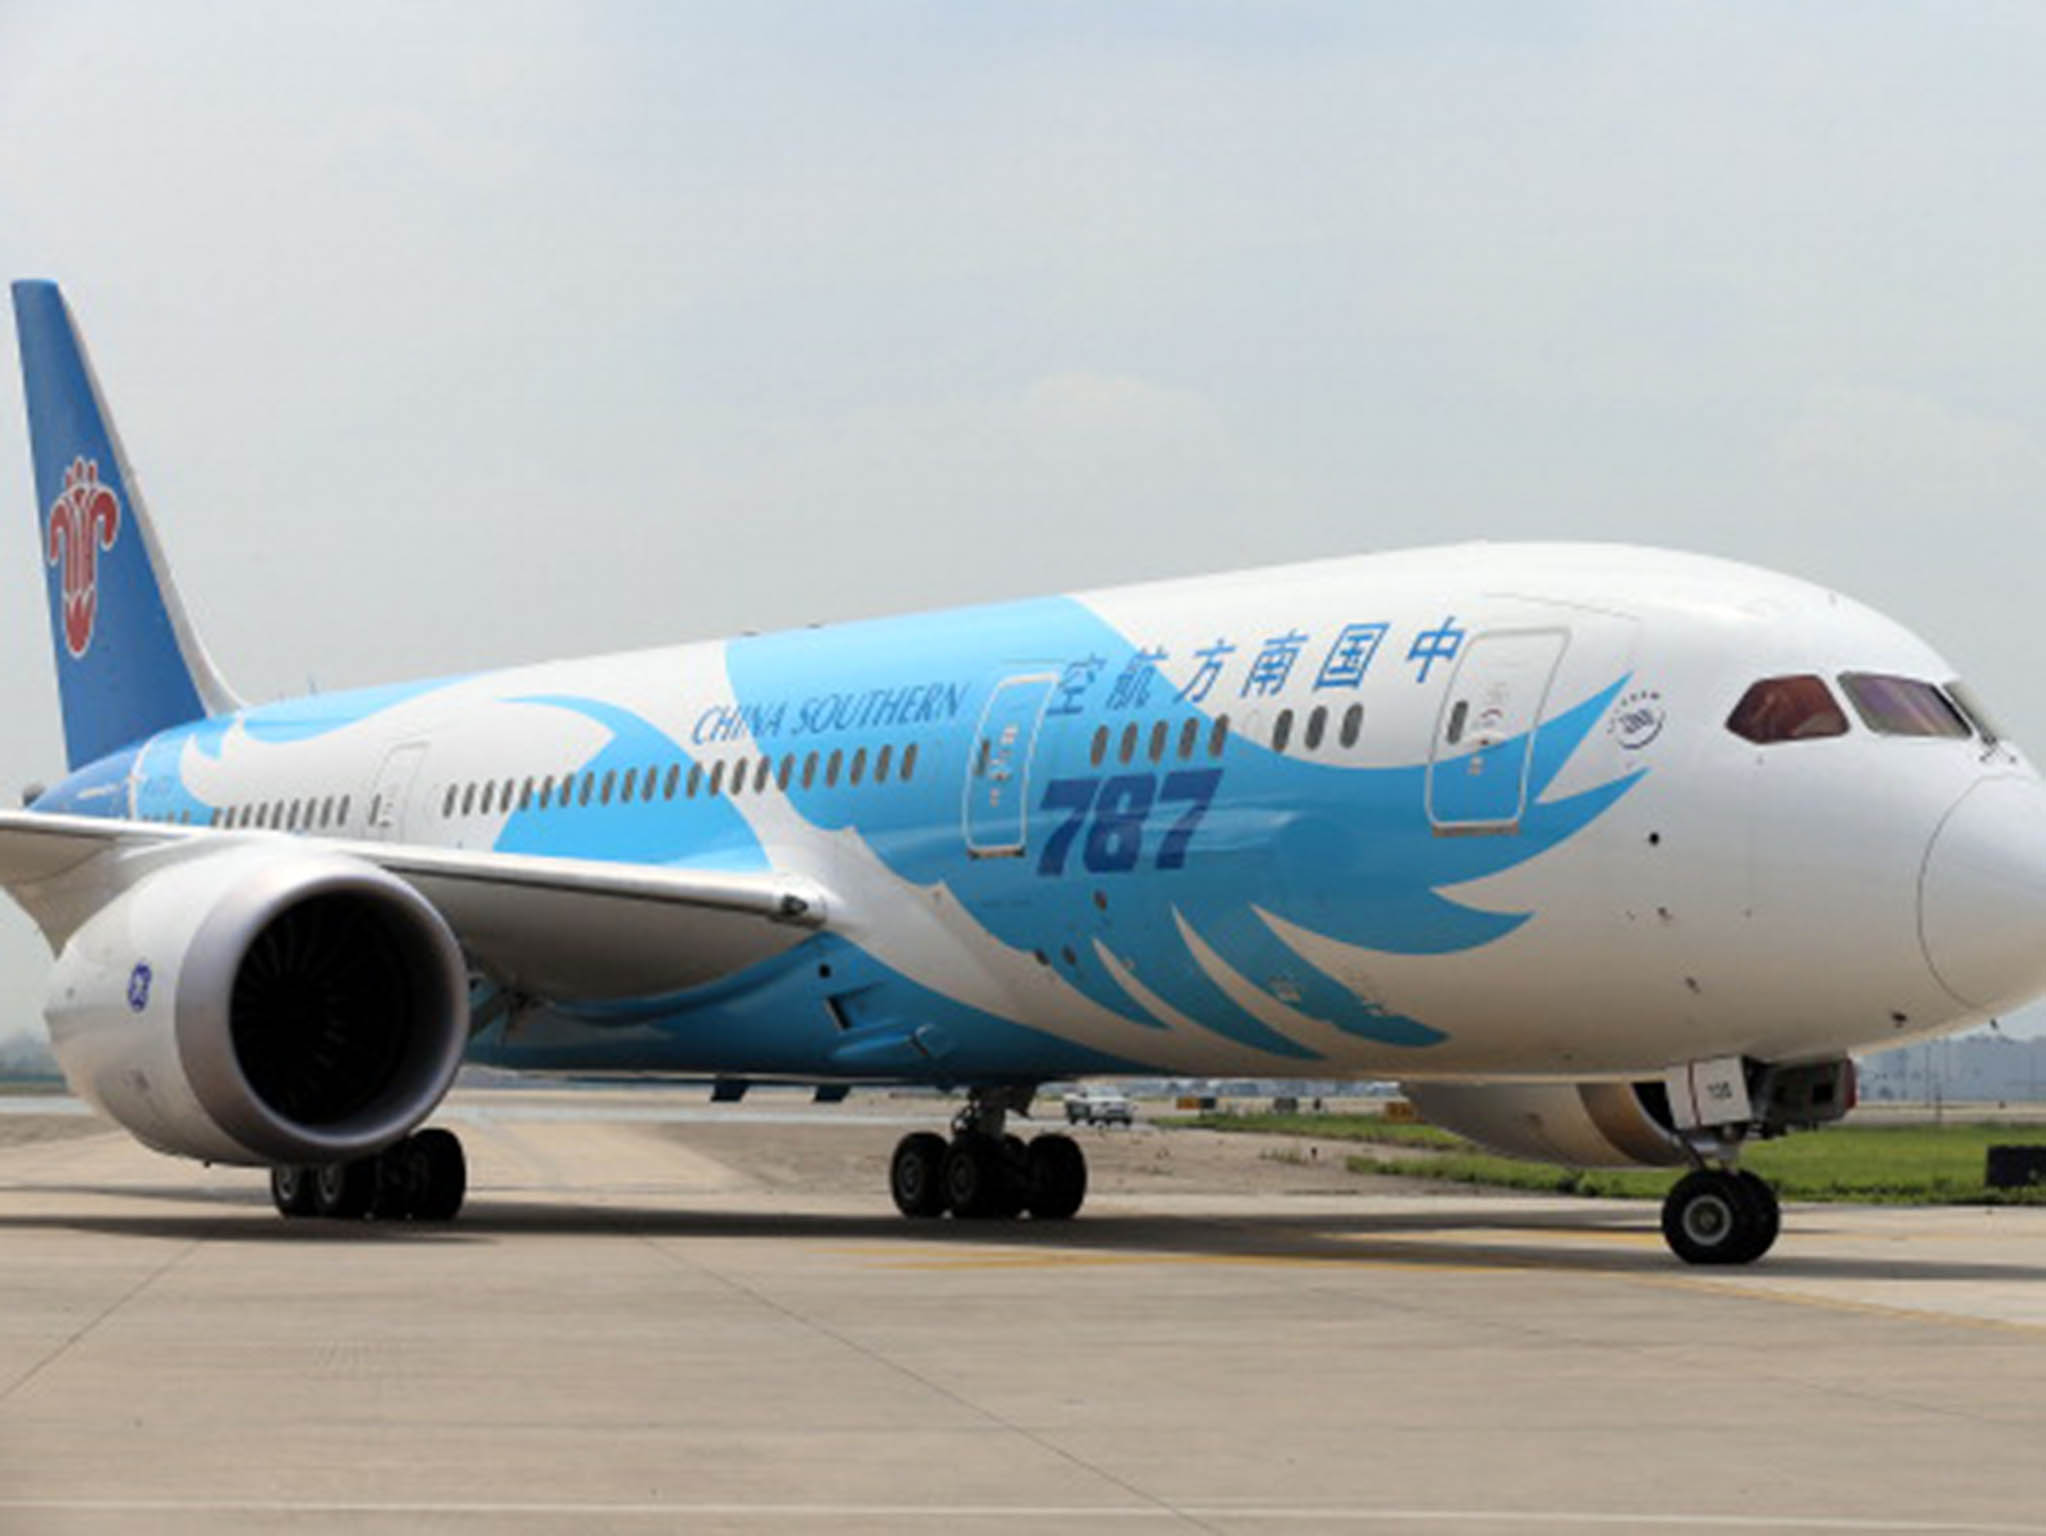 All passengers were removed from the China Southern Airlines flight while staff spent two hours putting the emergency slide away